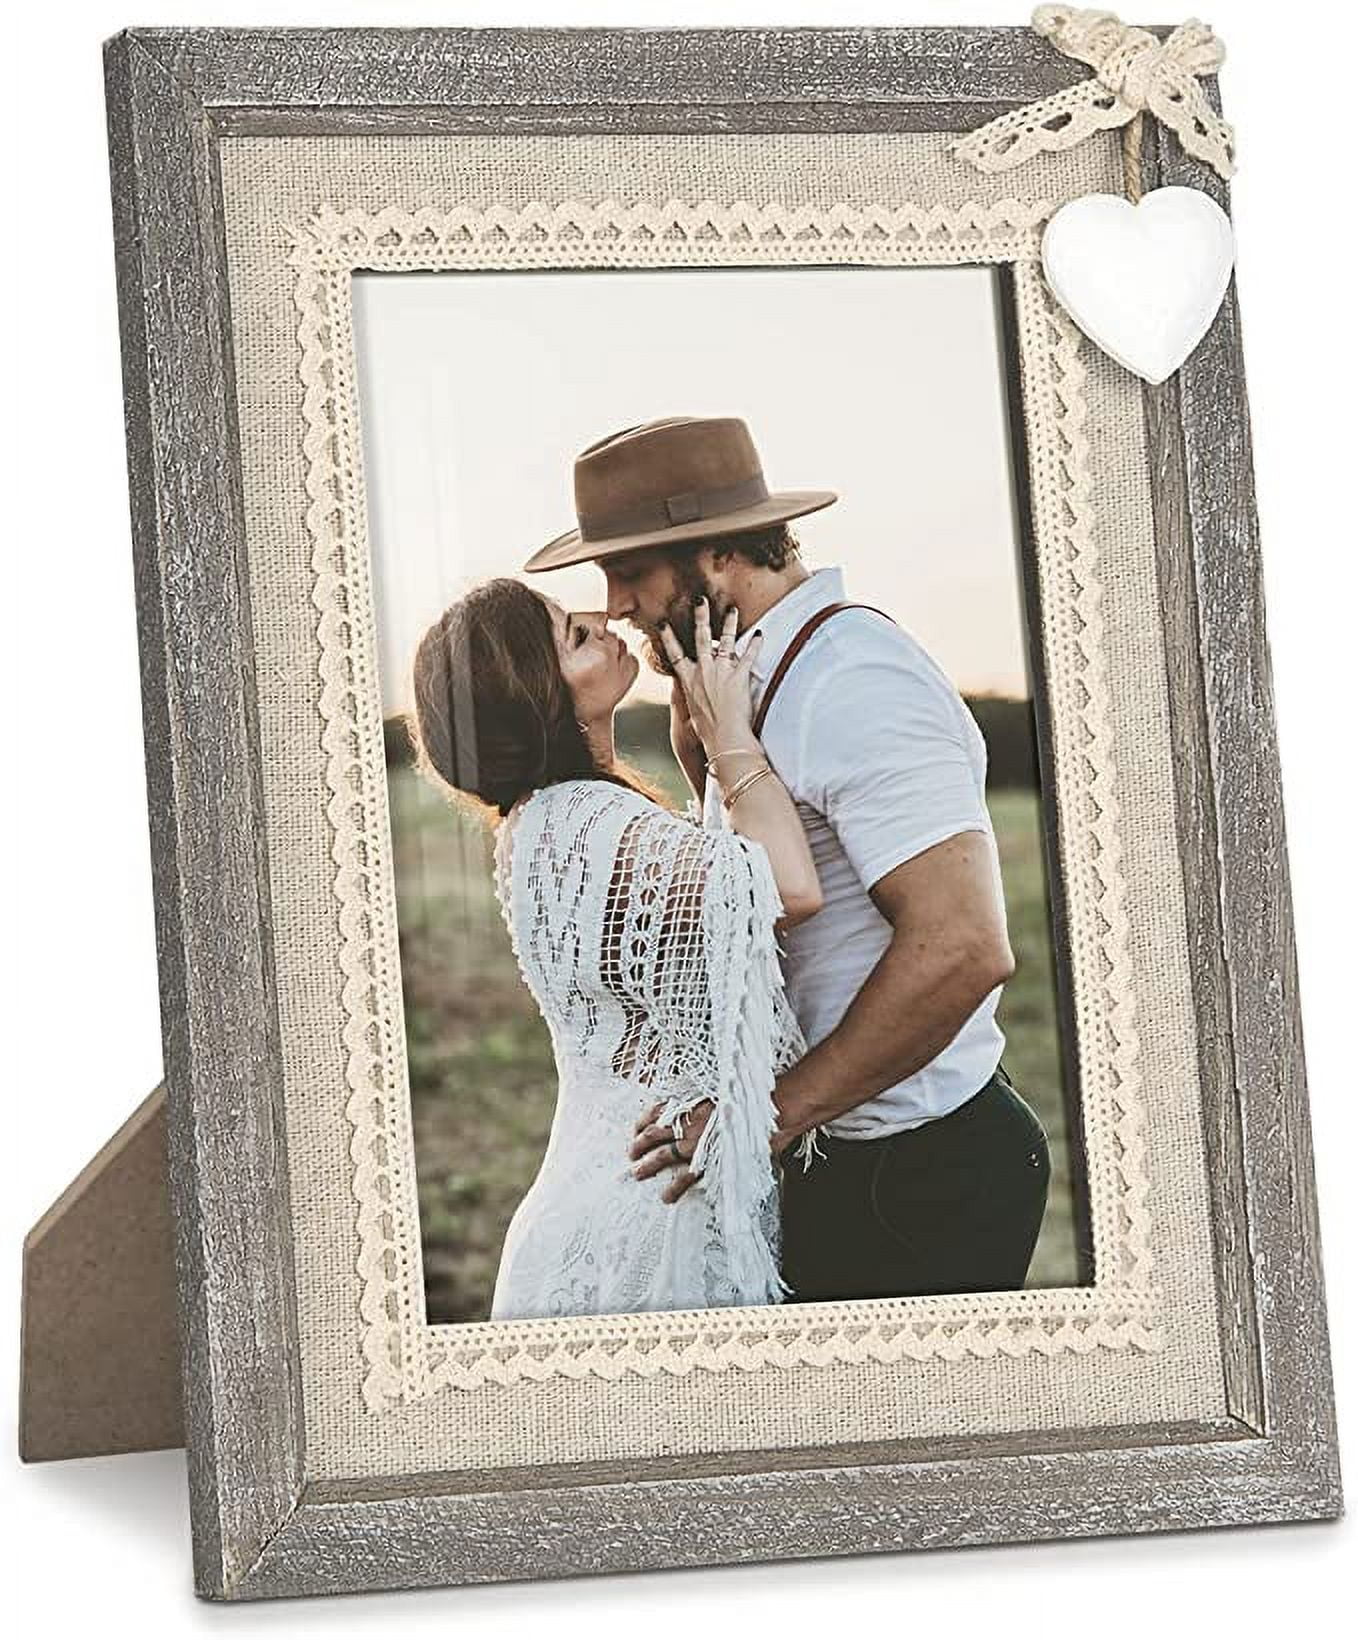 Chevron Recycled Photo Frame, 4x6 Picture, Grey, White and Brown